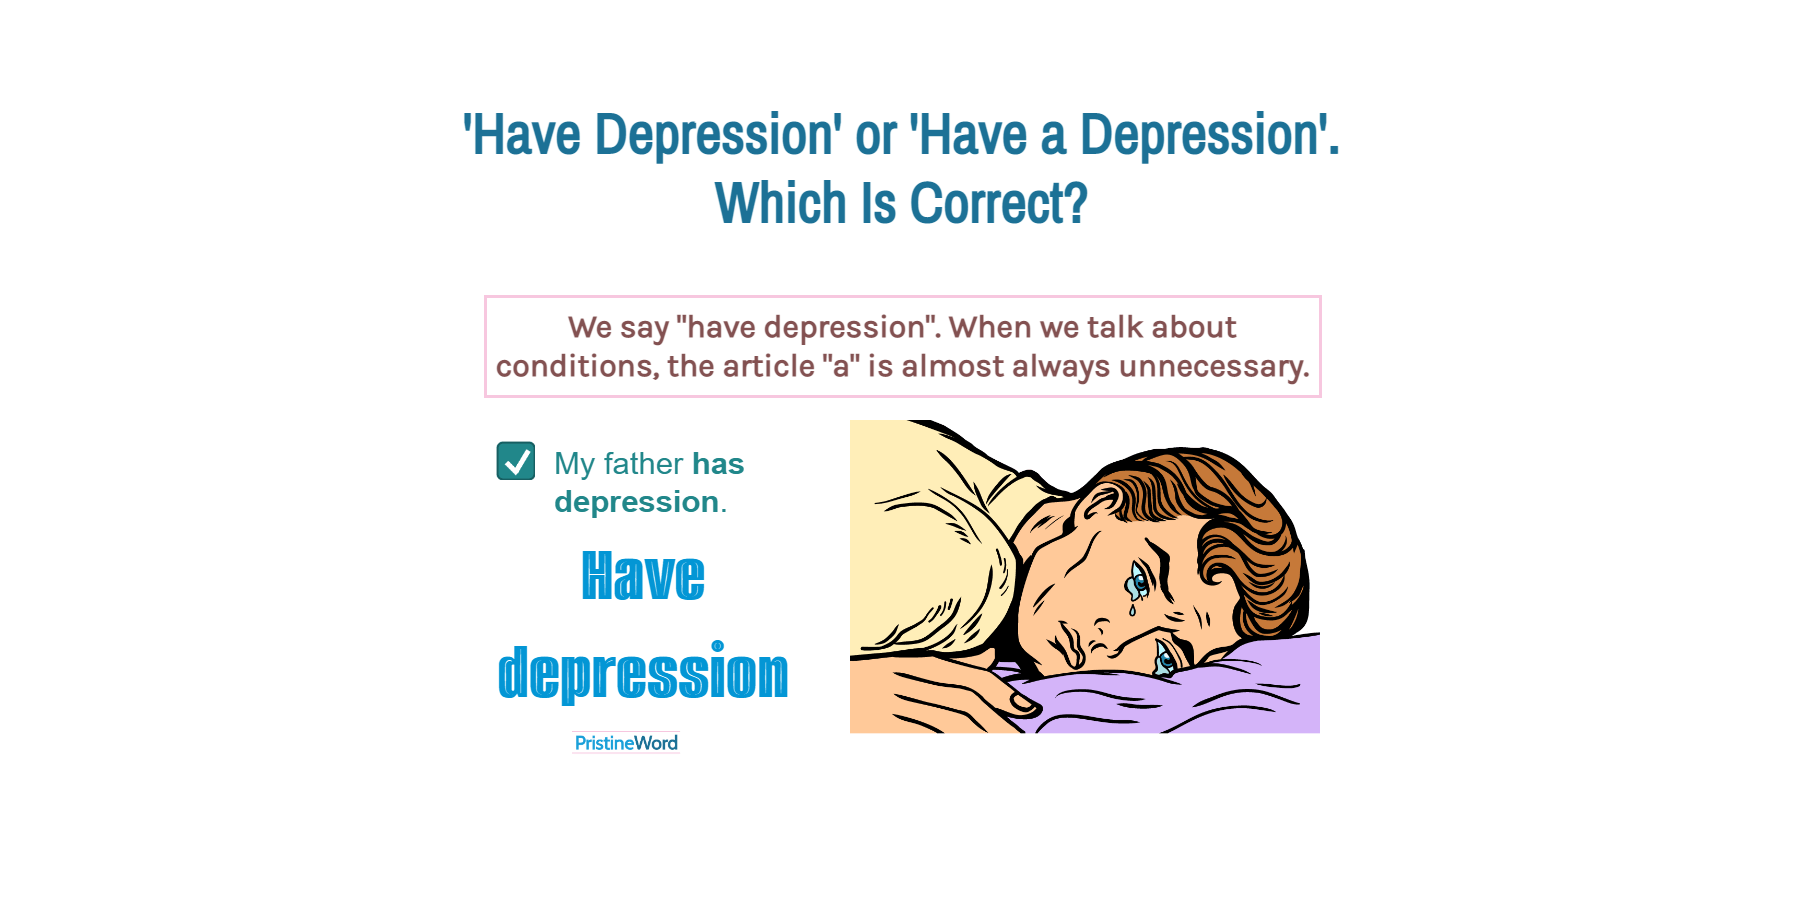 Have Depression or Have a Depression. Which Is Correct?